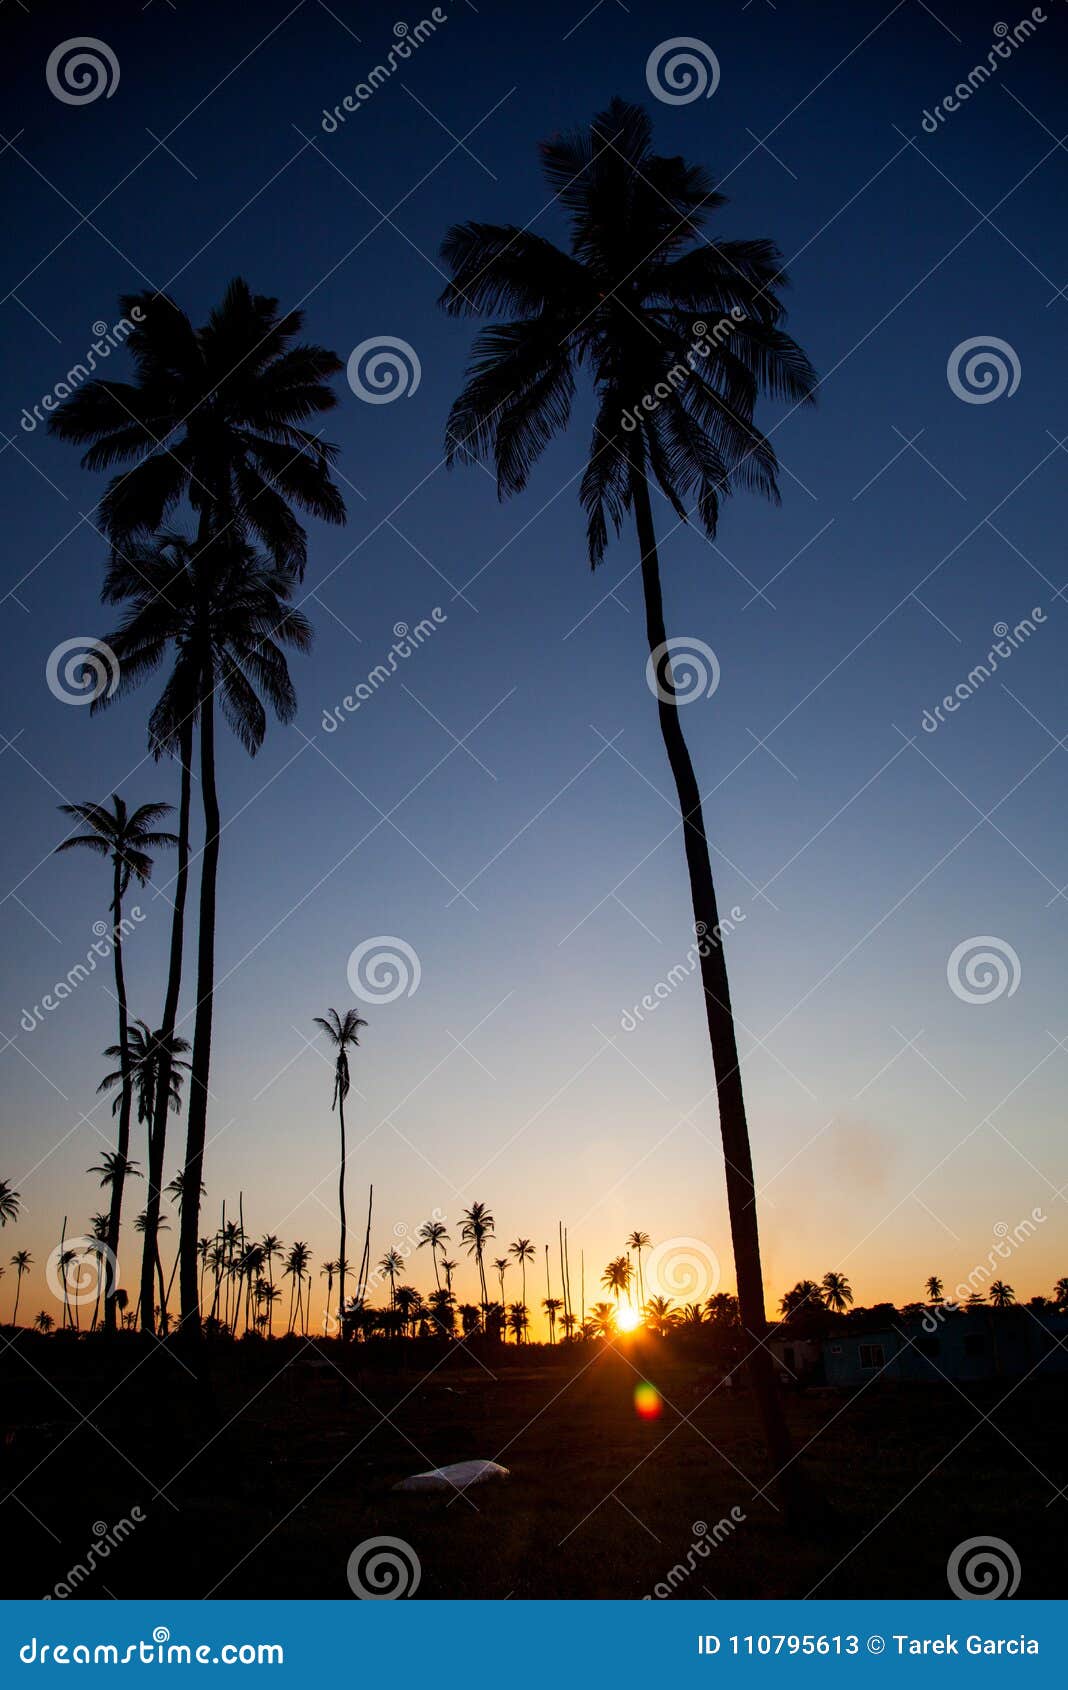 Amazing Colorful Sunset in the Island of San Andres Stock Image - Image ...